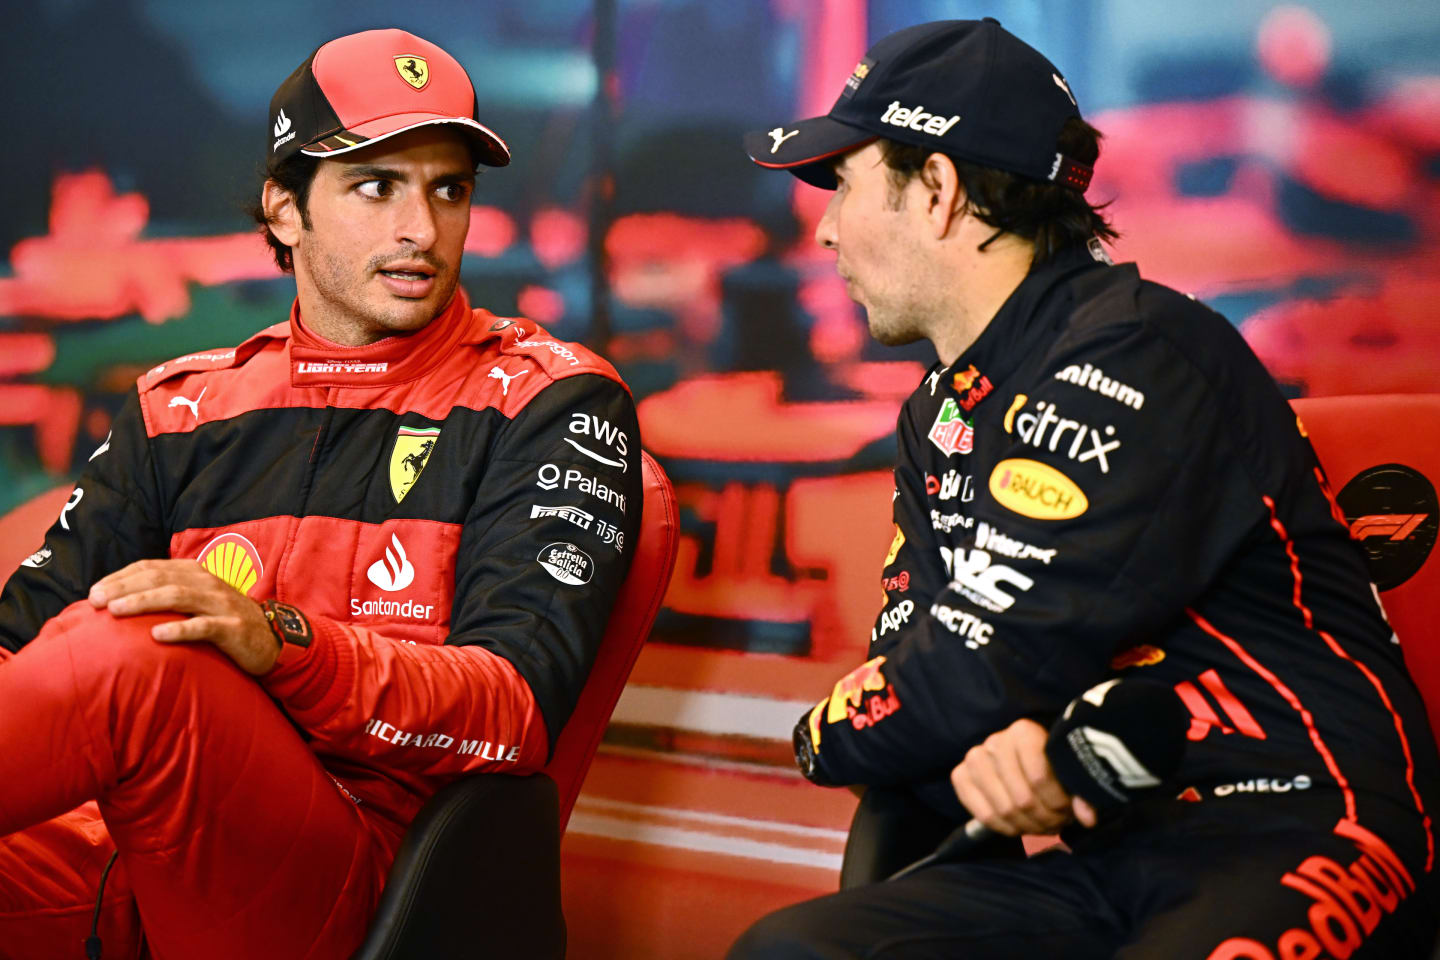 MONTE-CARLO, MONACO - MAY 29: Race winner Sergio Perez of Mexico and Oracle Red Bull Racing and Second placed Carlos Sainz of Spain and Ferrari talk in the press conference after the F1 Grand Prix of Monaco at Circuit de Monaco on May 29, 2022 in Monte-Carlo, Monaco. (Photo by Clive Mason/Getty Images)